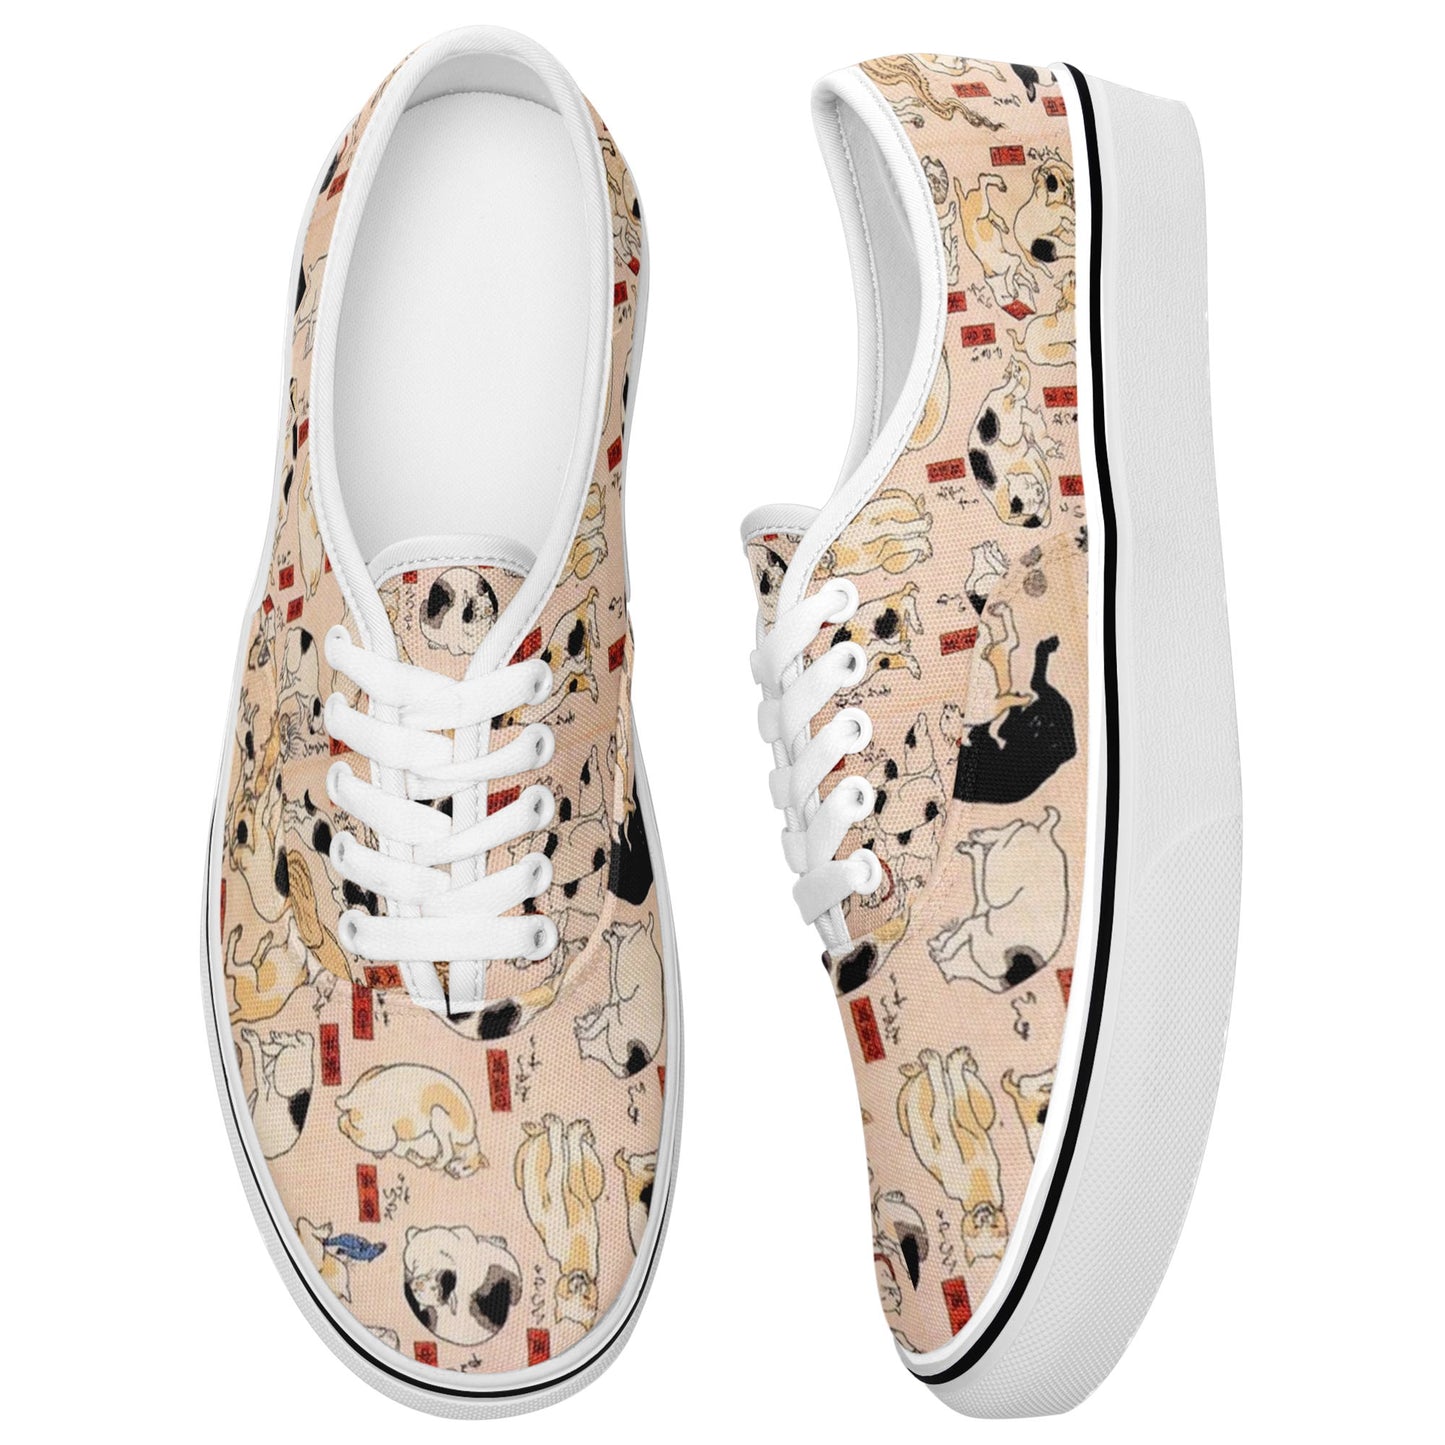 customize printed casual shoes 7213 with retro art ukiyo-e kuniyoshi utagawa's cats suggested as the fifty three stations of the tokaido sneakers white soles 4